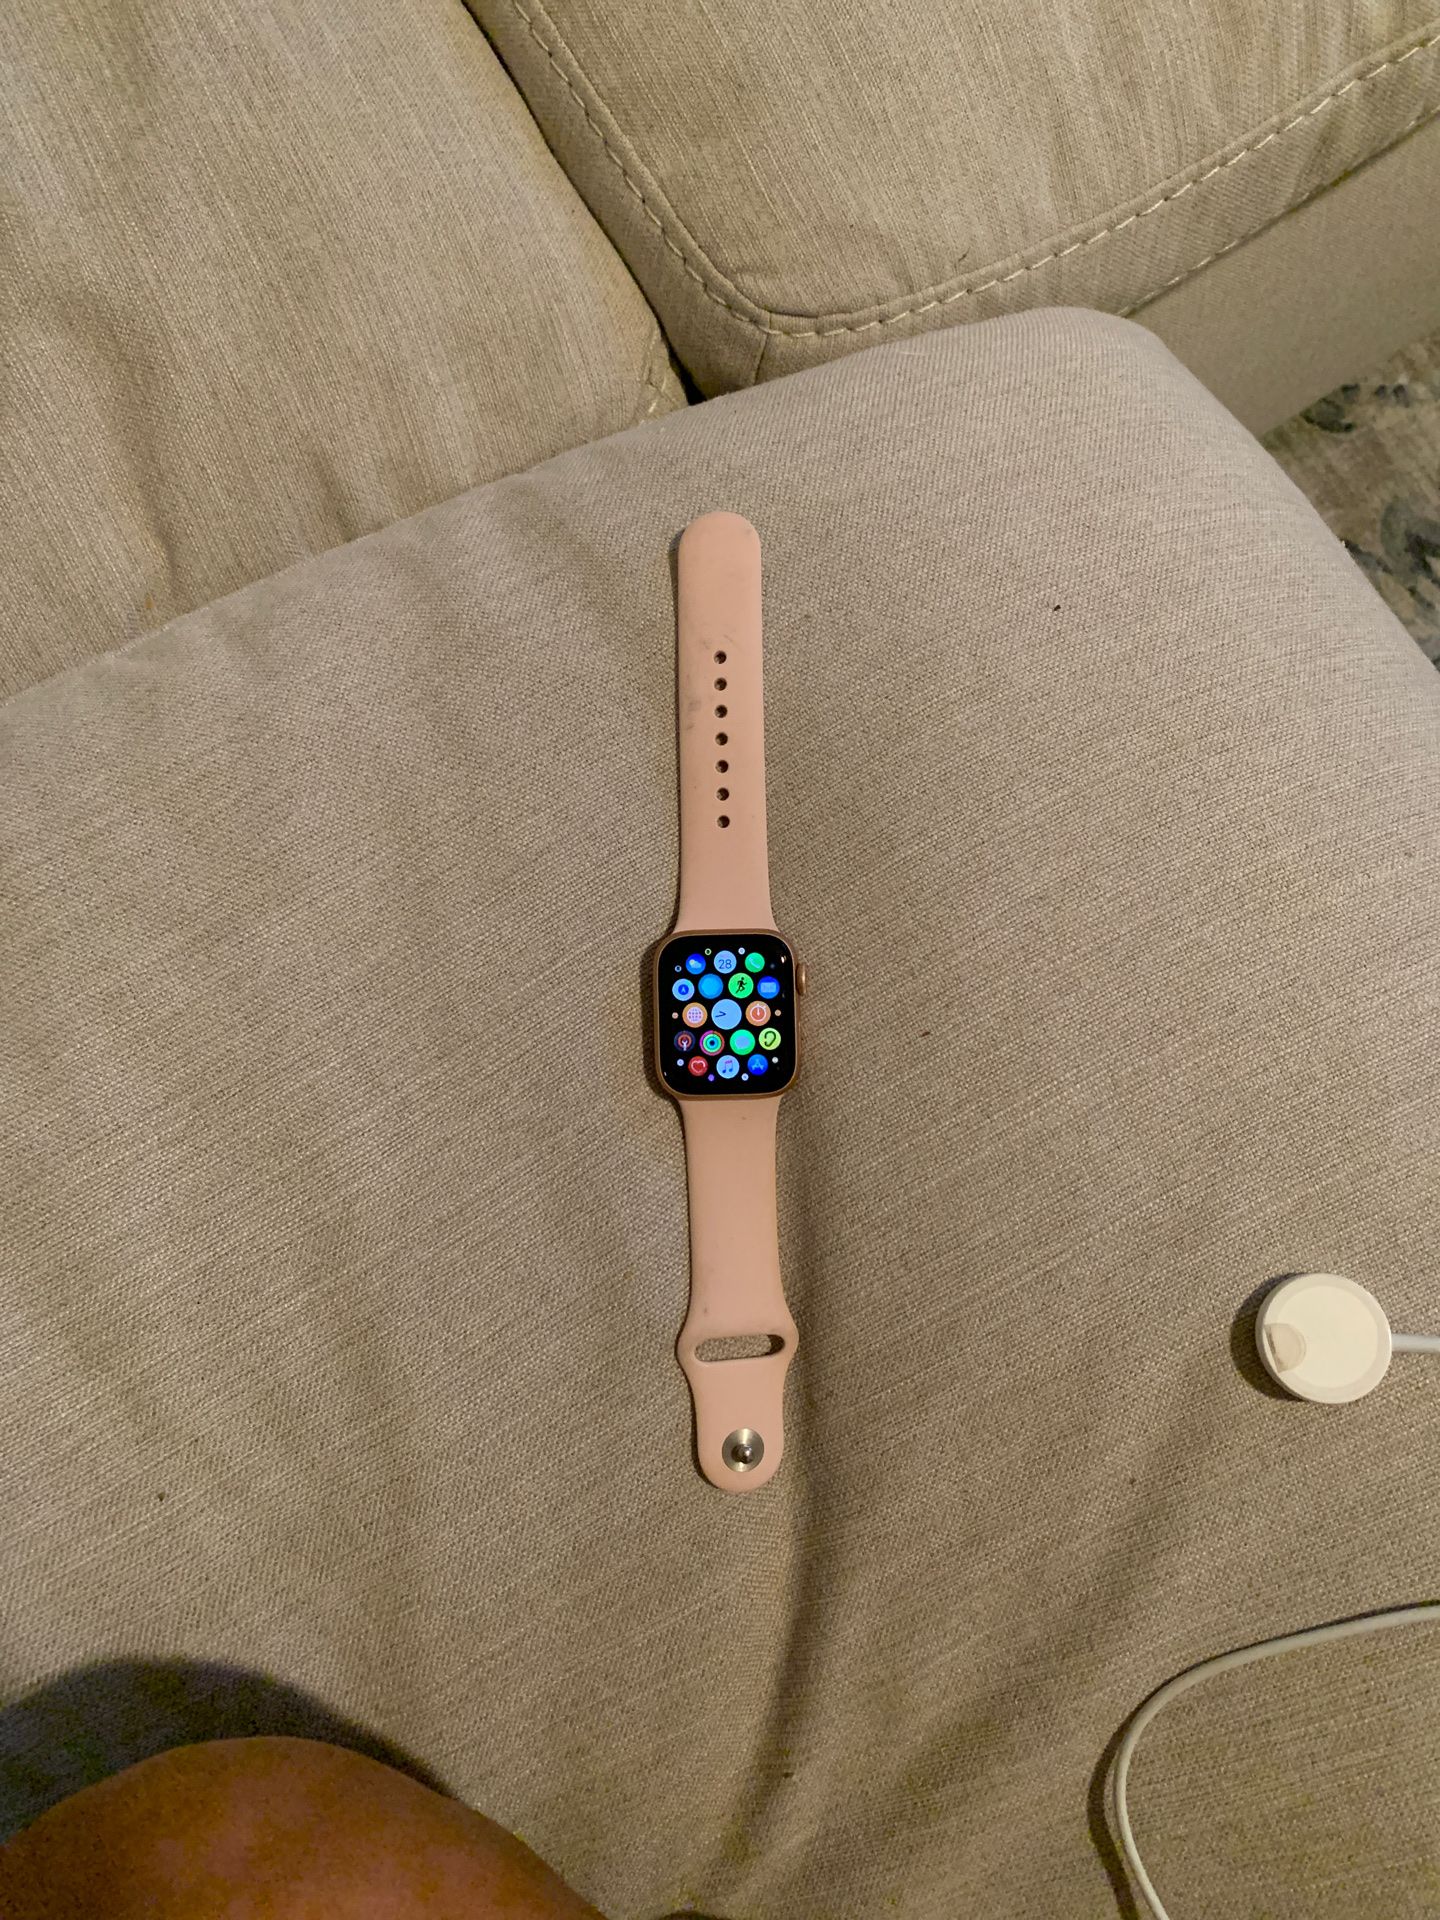 iPhone watch, with charger.